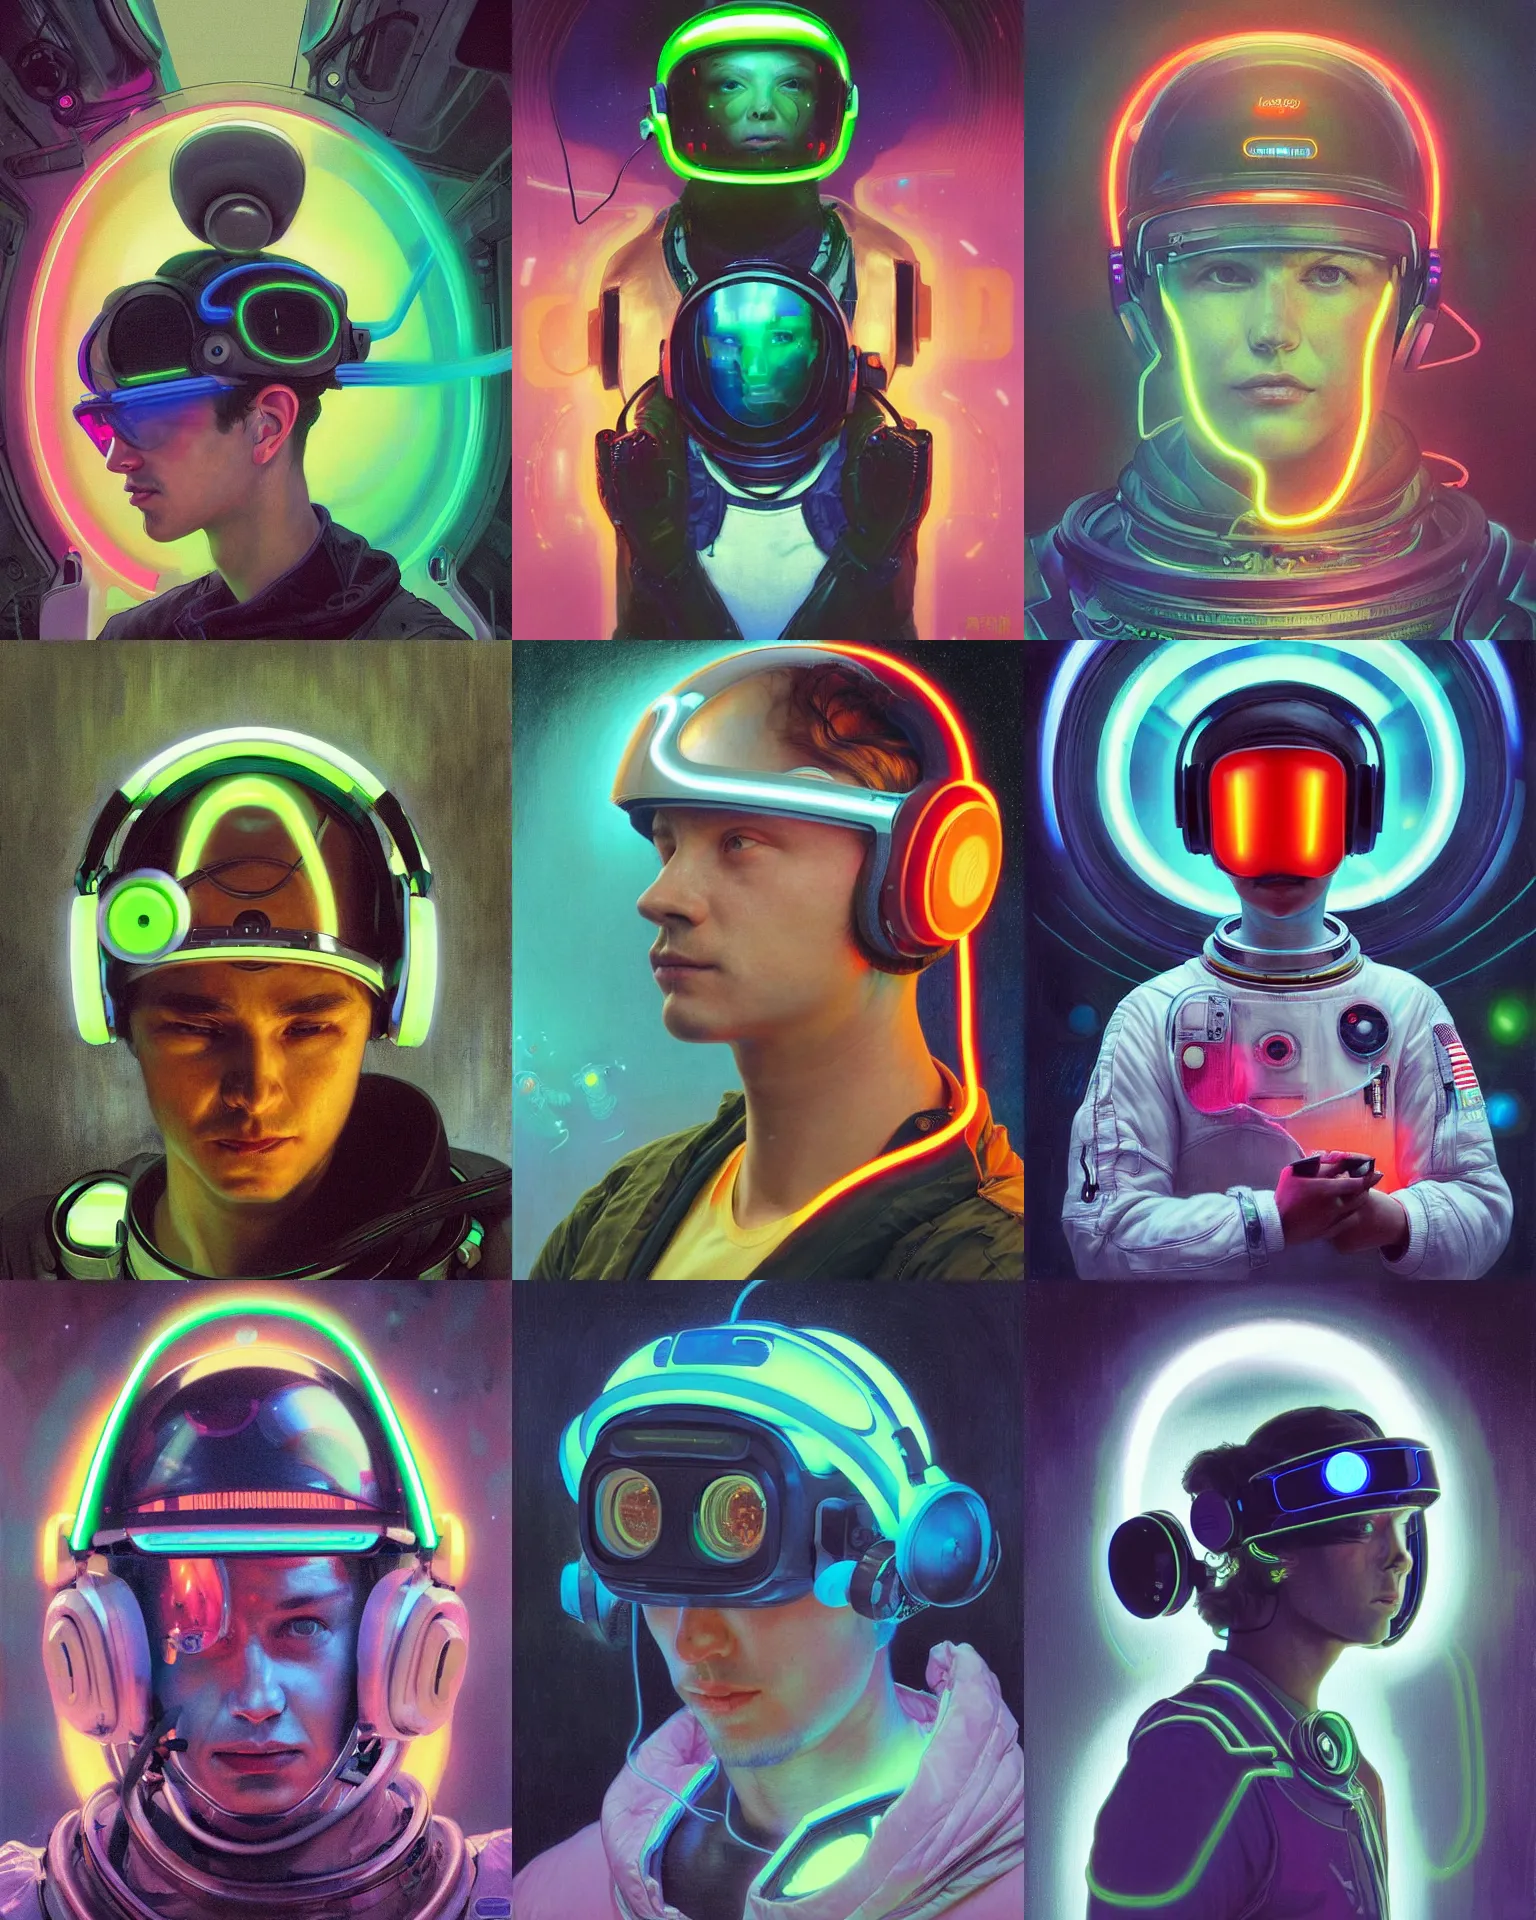 Prompt: future coder looking on, glowing visor over eyes and sleek neon headphones, neon accents, desaturated headshot portrait painting by dean cornwall, ilya repin, donato giancola, tom whalen, alex grey, alphonse mucha, astronaut cyberpunk electric fashion photography